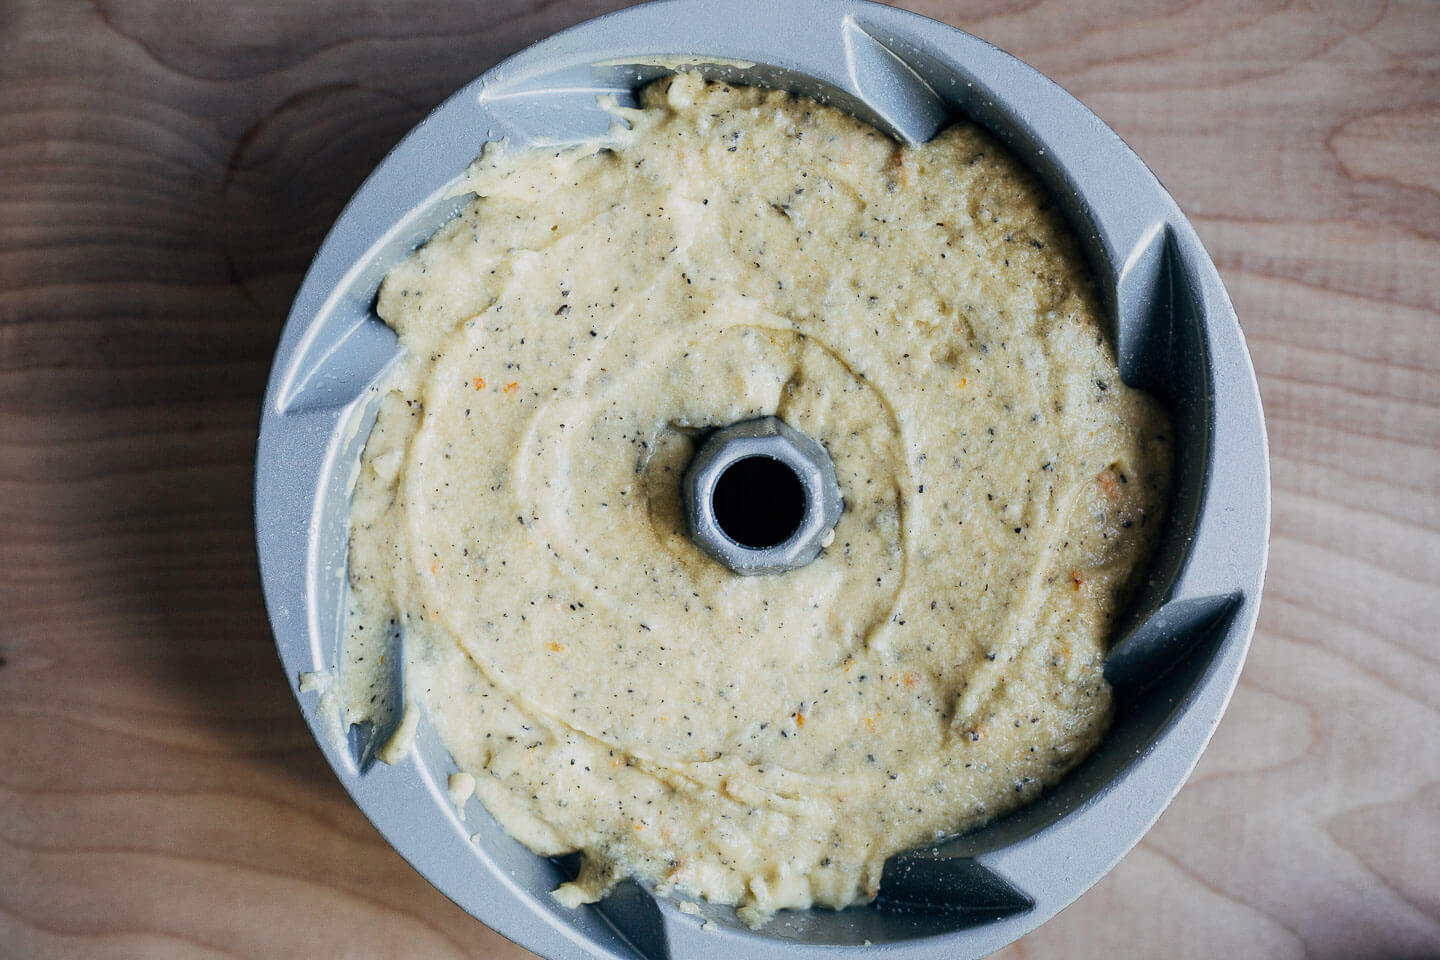 A bundt pan filled with batter and ready to bake. 